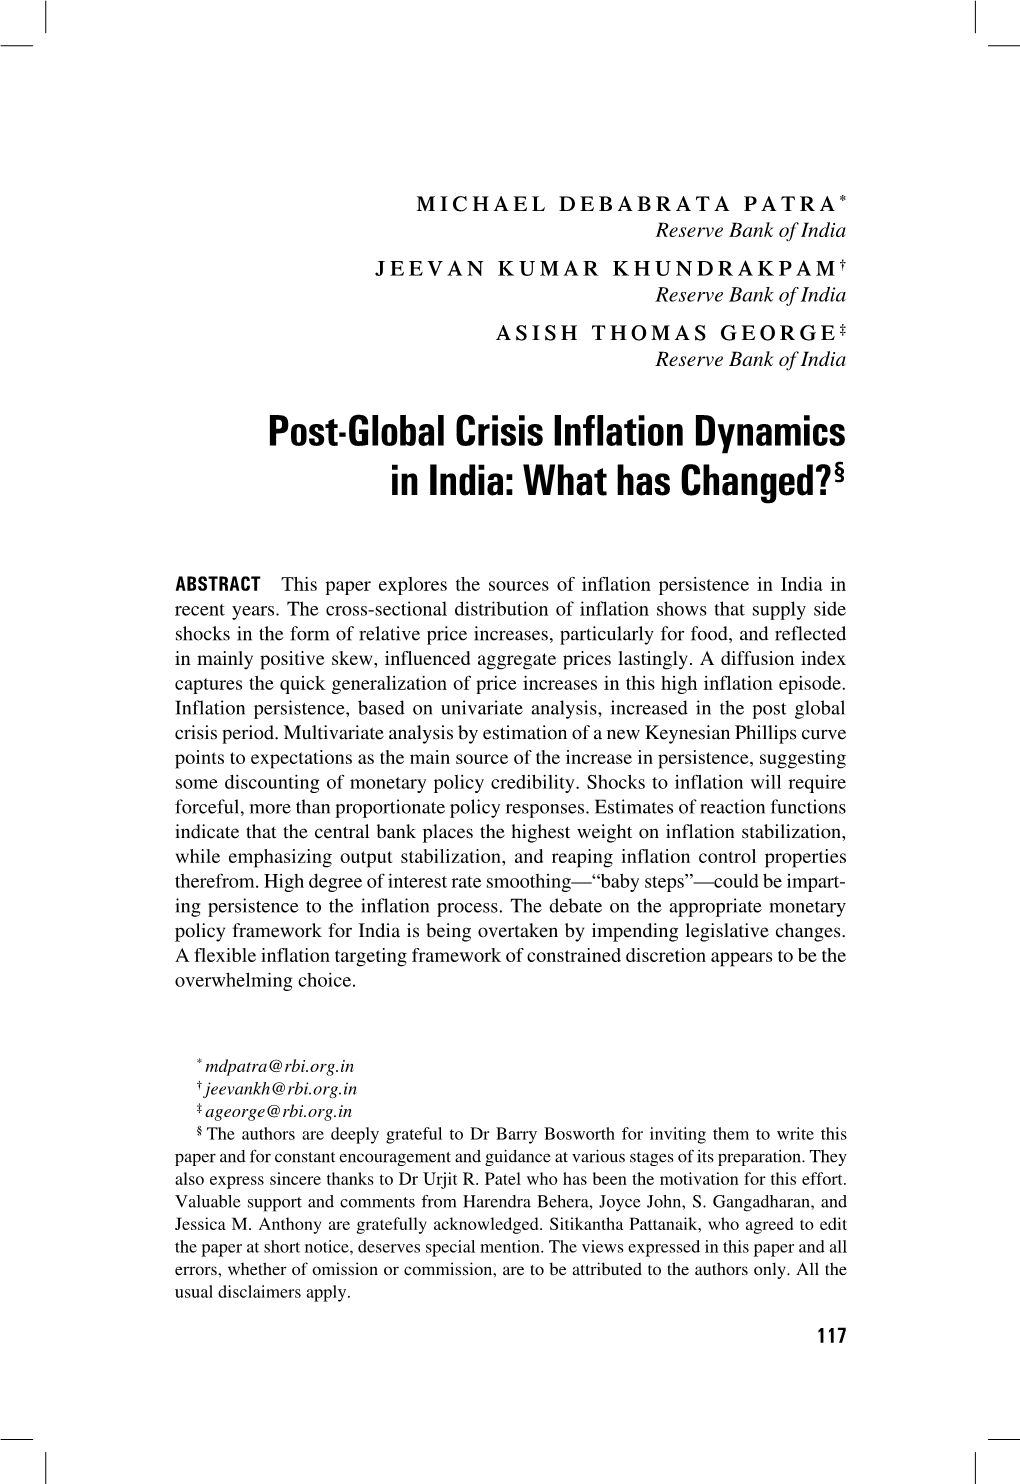 Post-Global Crisis Inflation Dynamics in India: What Has Changed?§